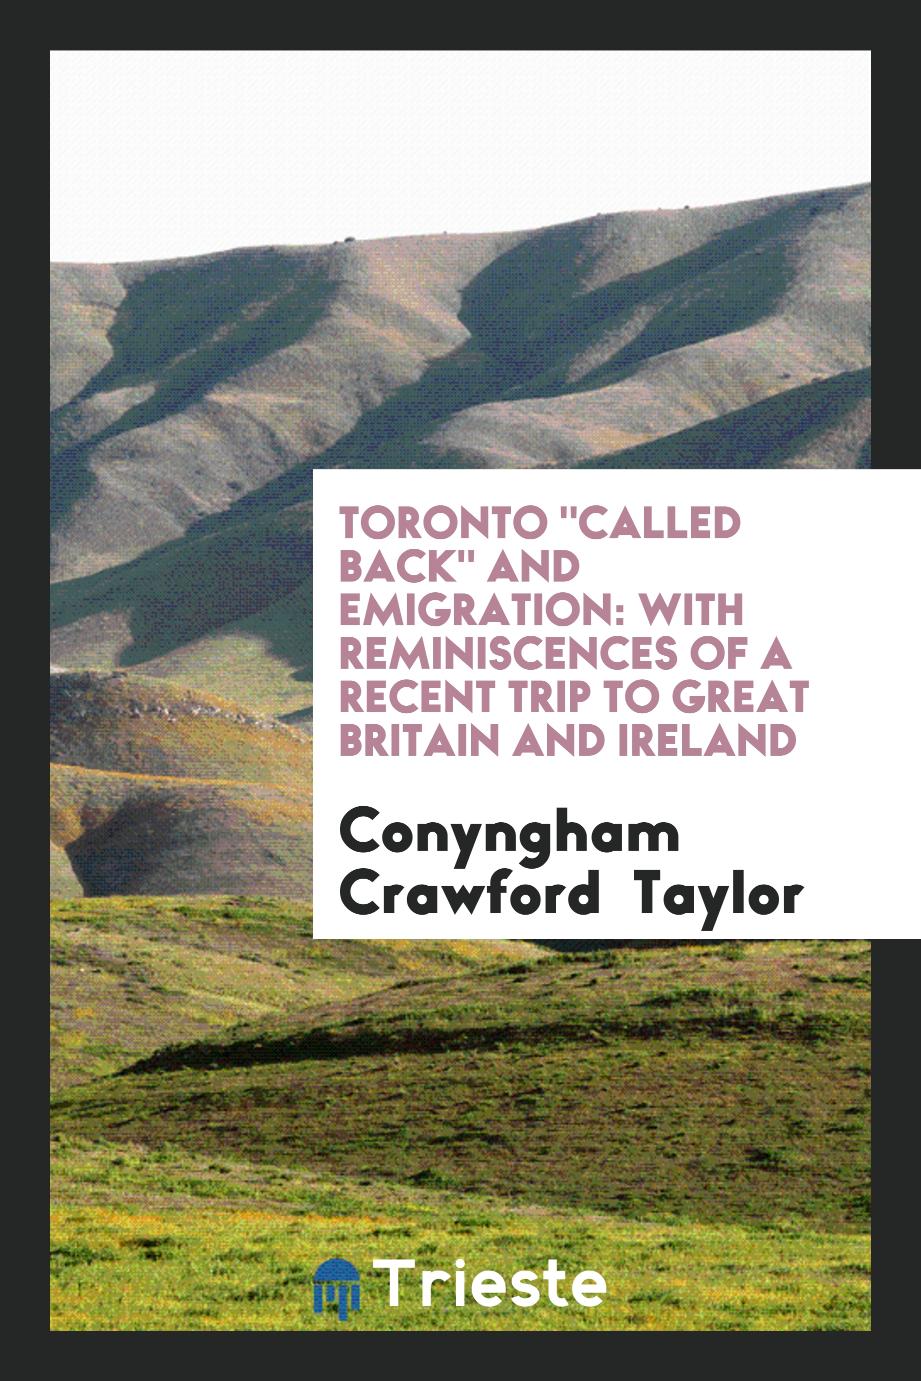 Toronto "Called Back" and Emigration: With Reminiscences of a Recent Trip to Great Britain and Ireland